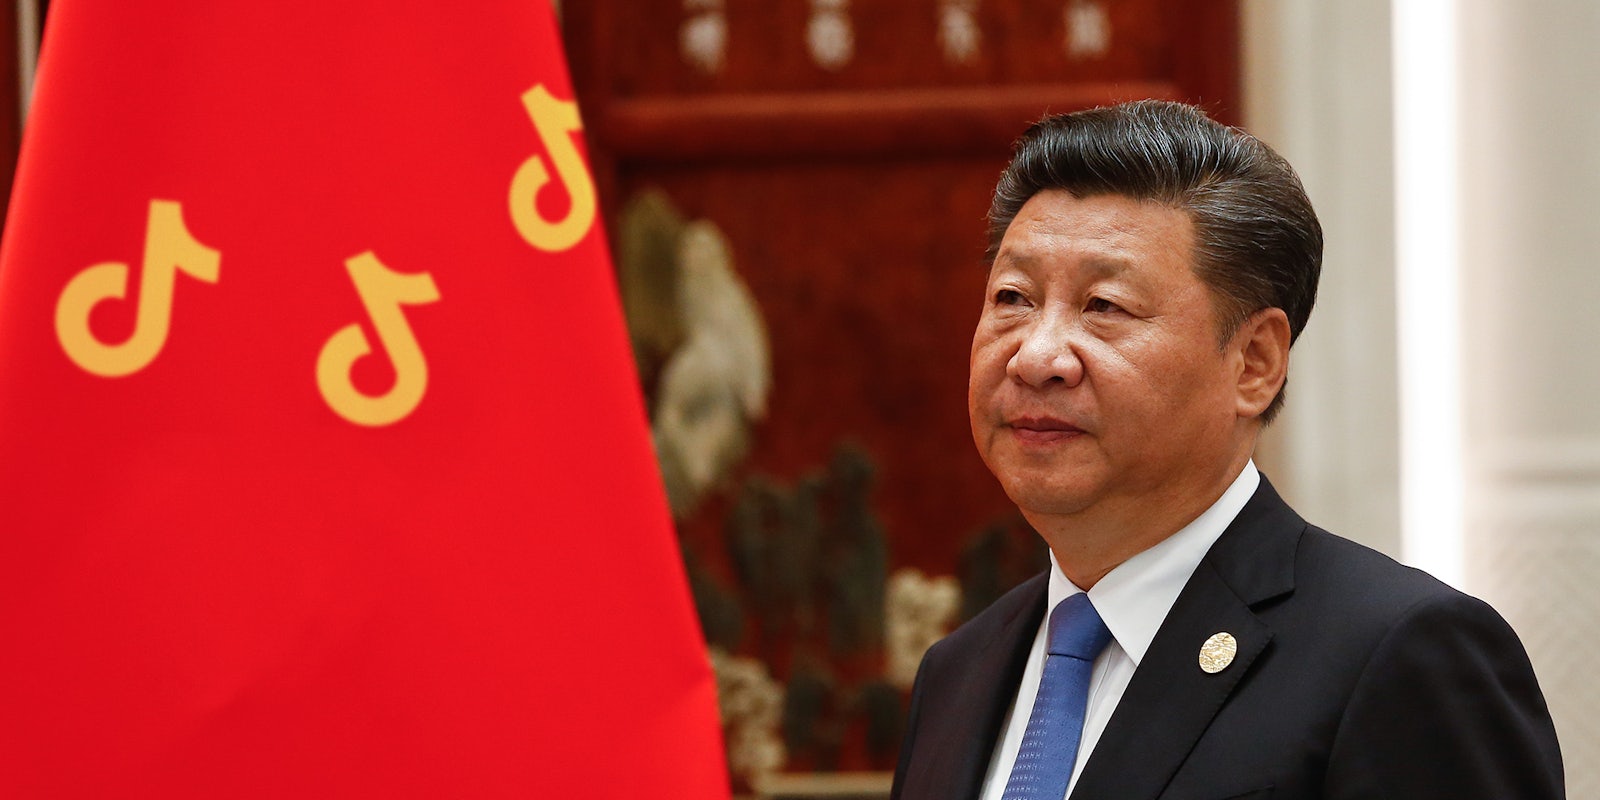 Xi Jinping looks at Chinese flag with stars replaced by TikTok logos